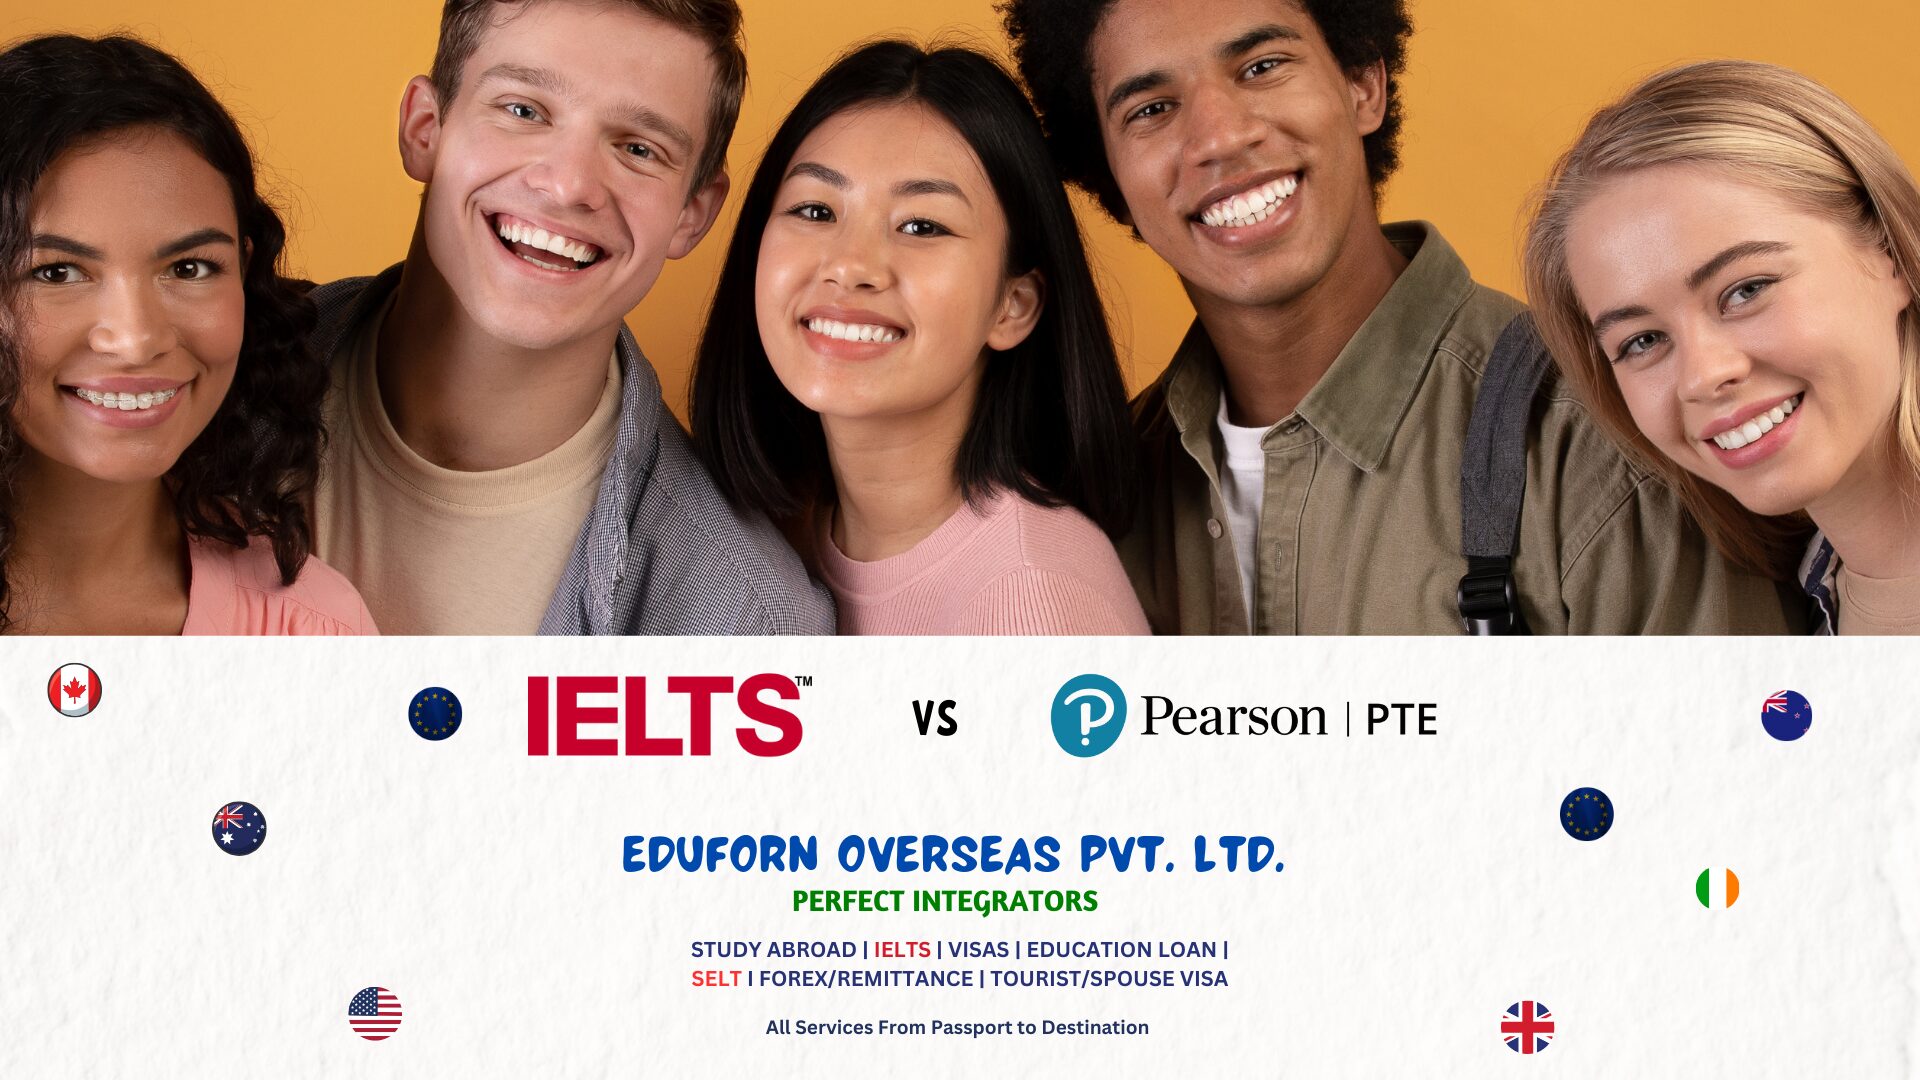 Which is better- IELTS or PTE?